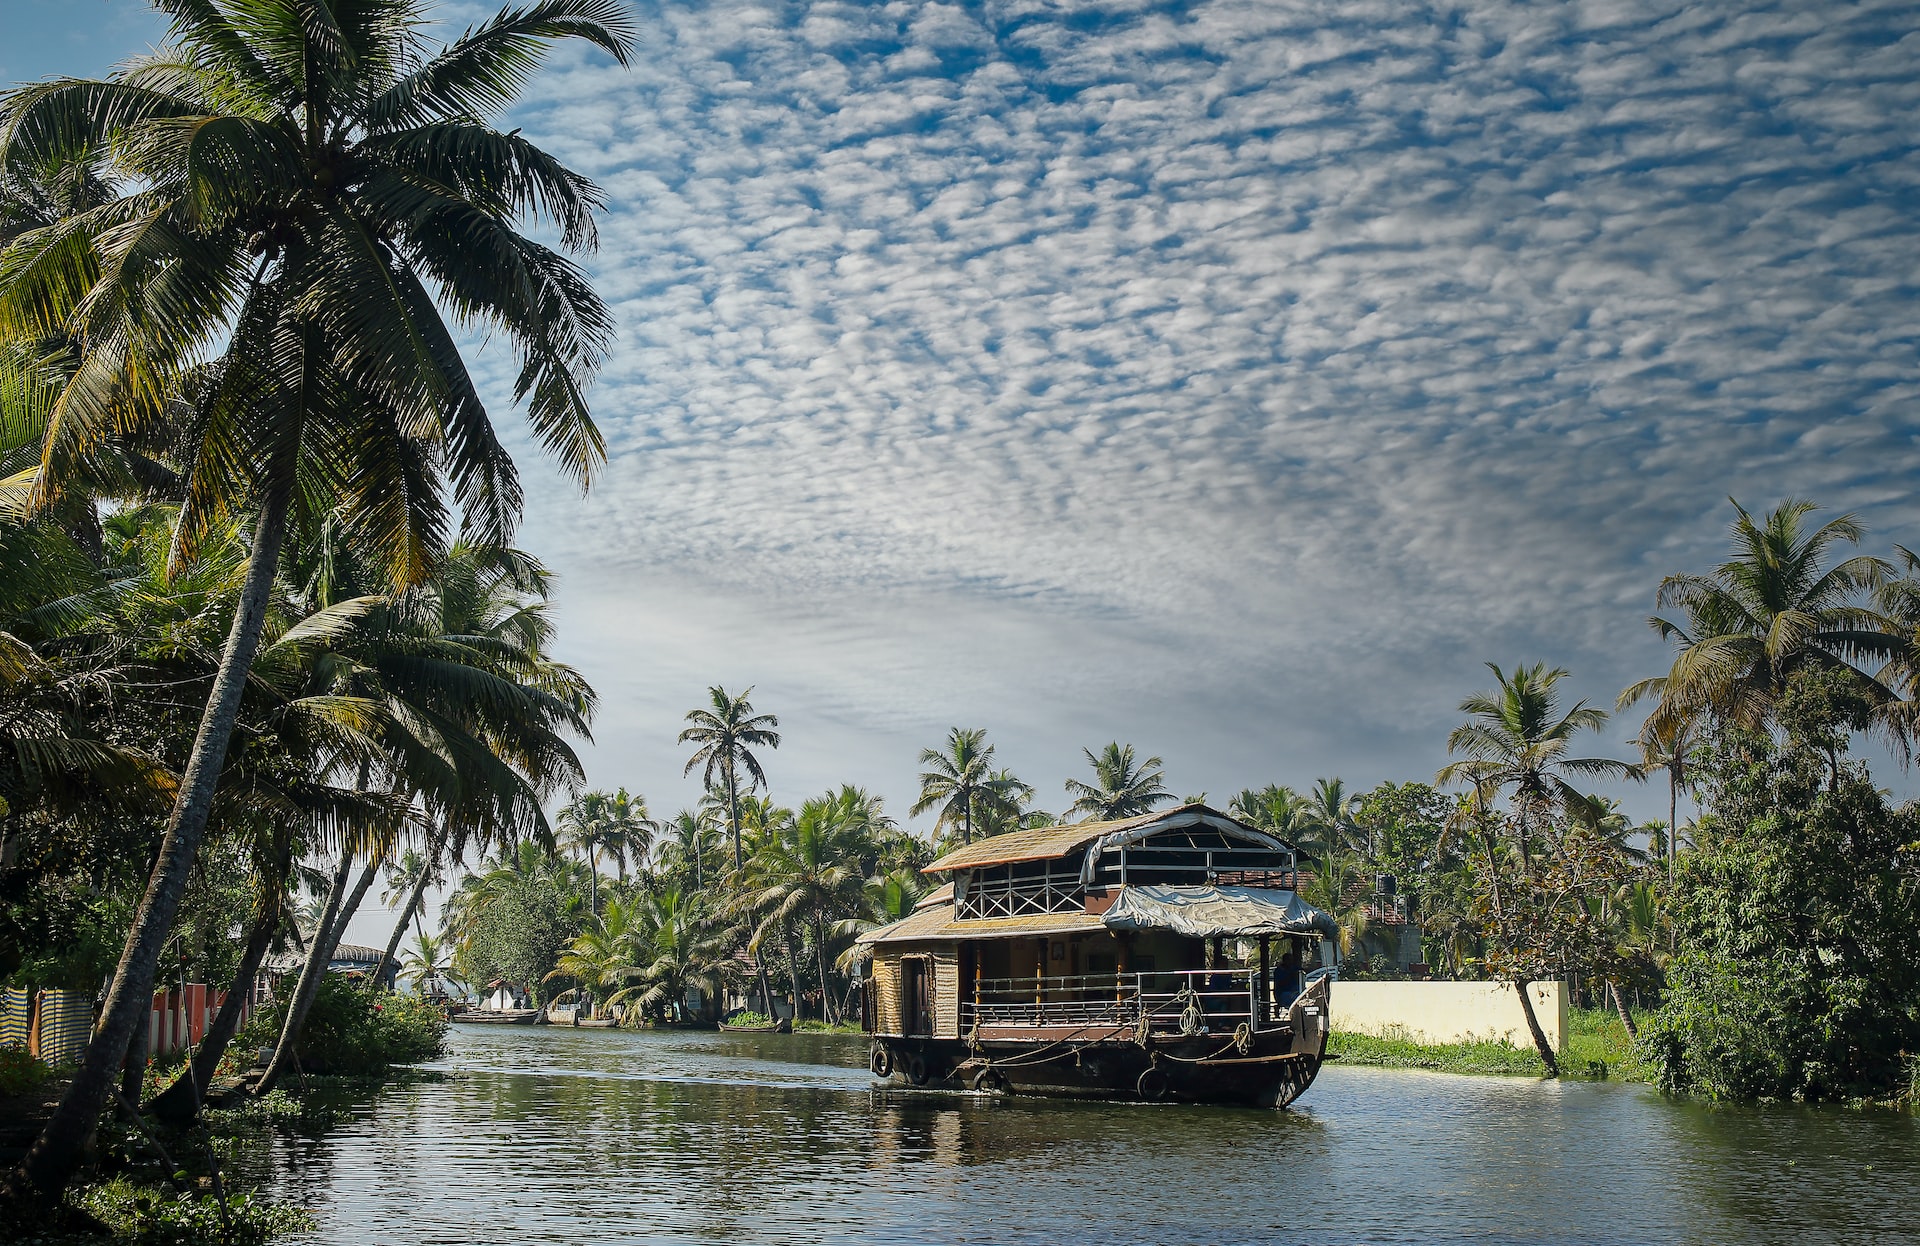 Kerala best places in india
